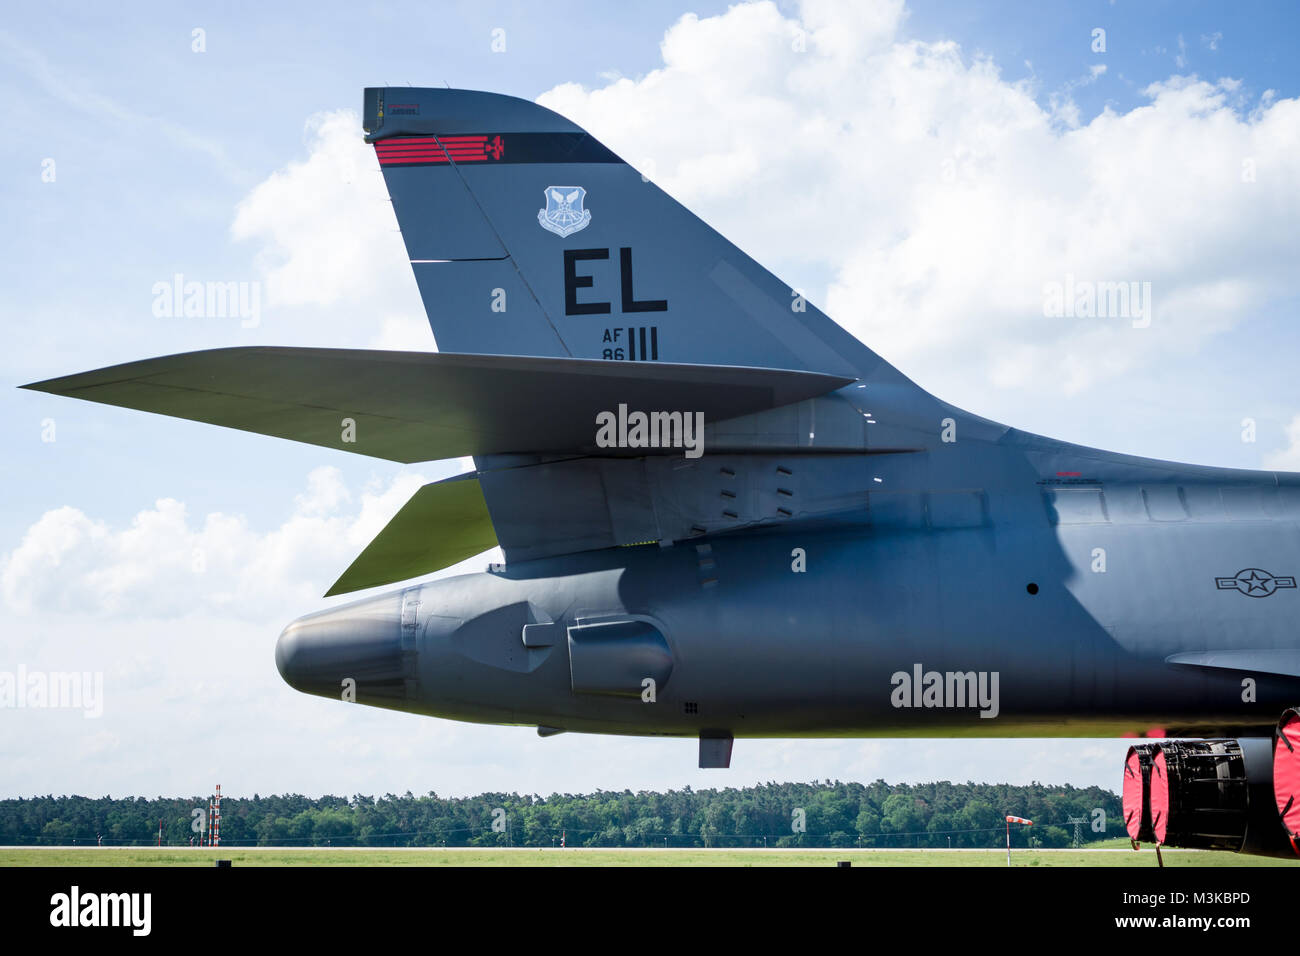 BERLIN, GERMANY - JUNE 03, 2016: Fragment of a four-engine supersonic variable-sweep wing, jet-powered heavy strategic bomber Rockwell B-1B Lancer. US Air Force. Exhibition ILA Berlin Air Show 2016 Stock Photo